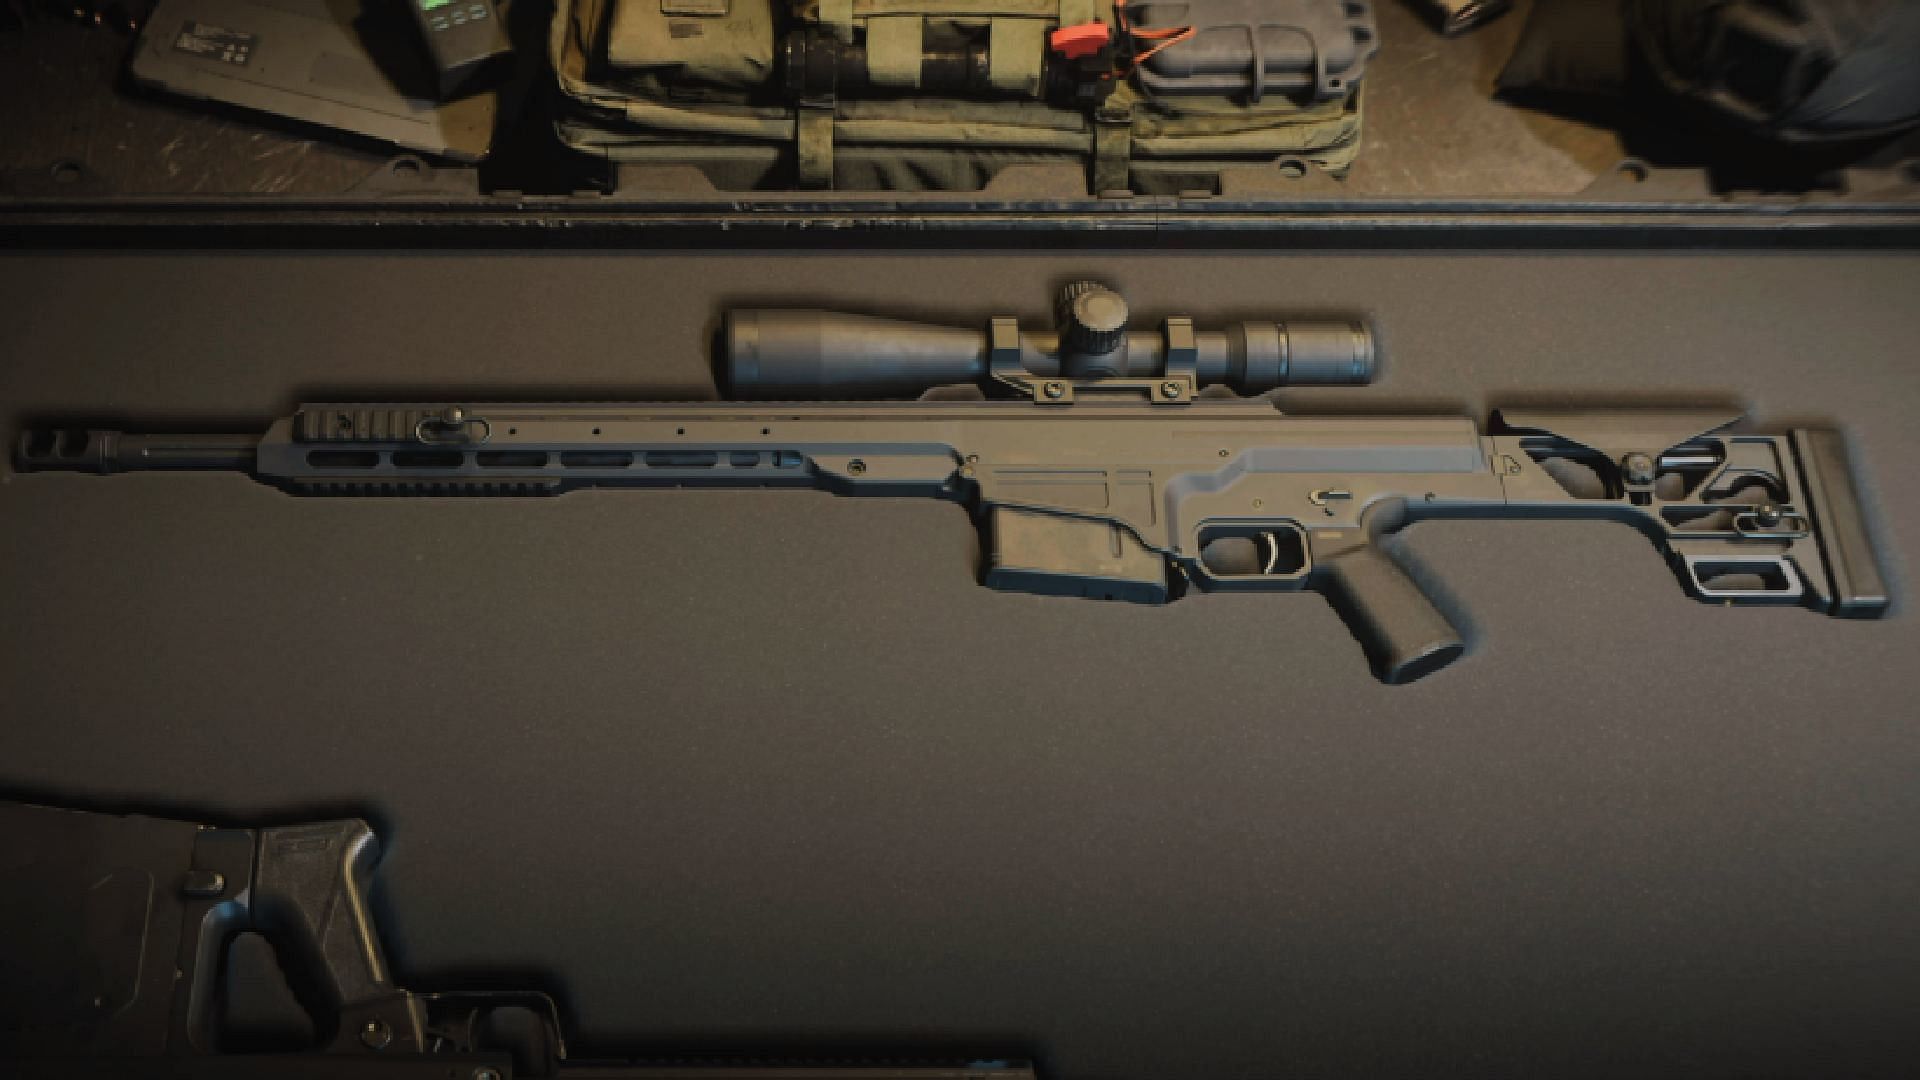 Barrett MRAD: Hands-on with the US military's new favorite sniper